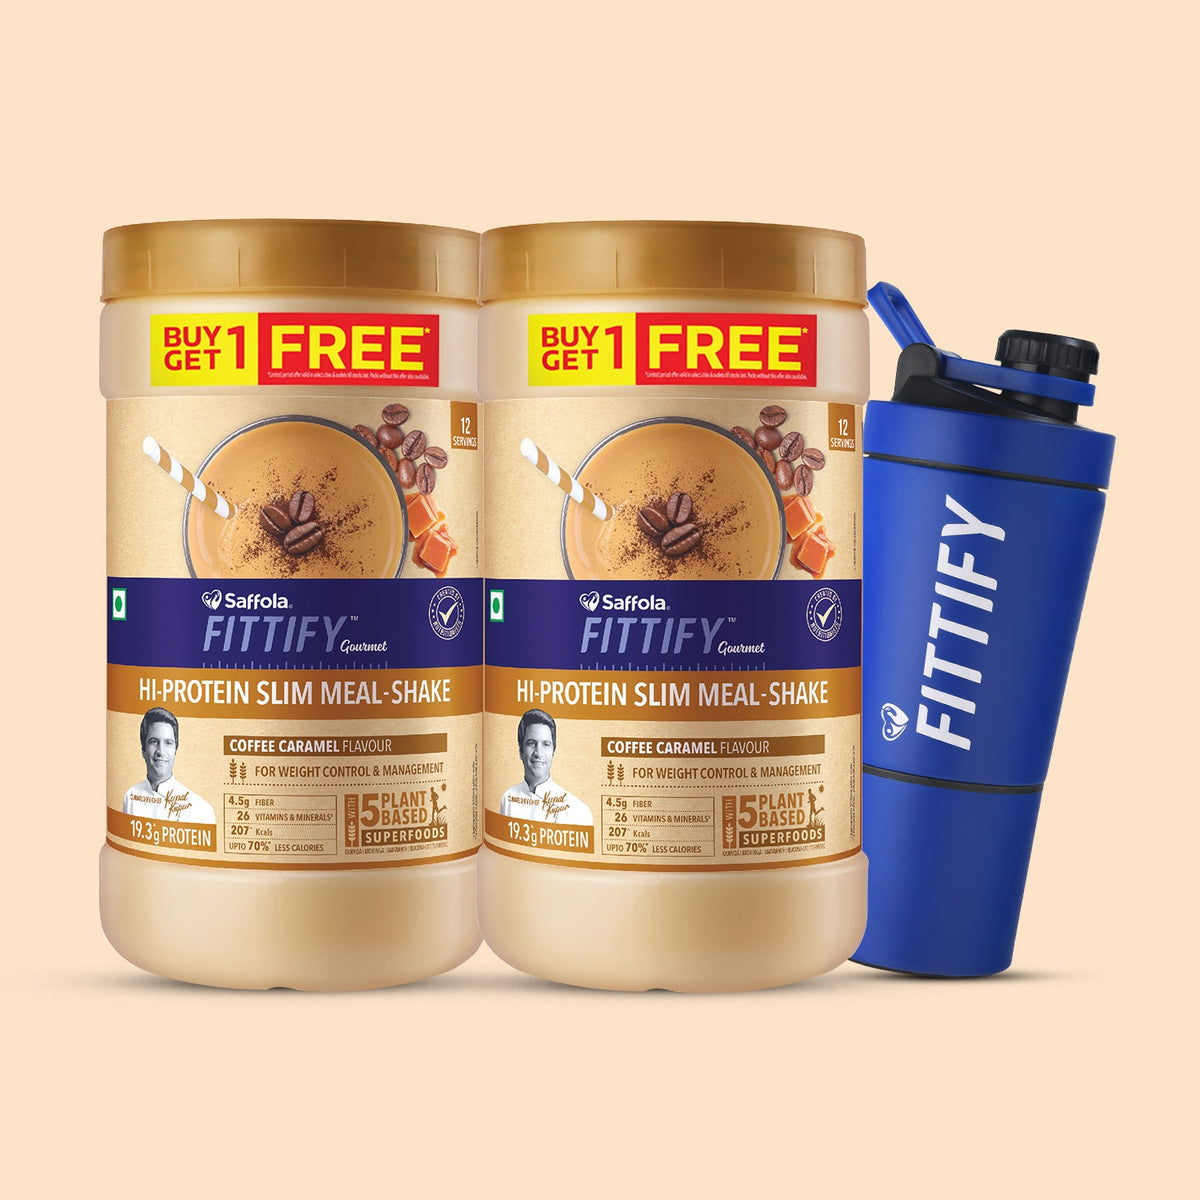 [CRED] Saffola Fittify Hi-Protein Slim Meal Shake Coffee Caramel BOGO + Metal Blue Shaker With Compartment 500ml Combo